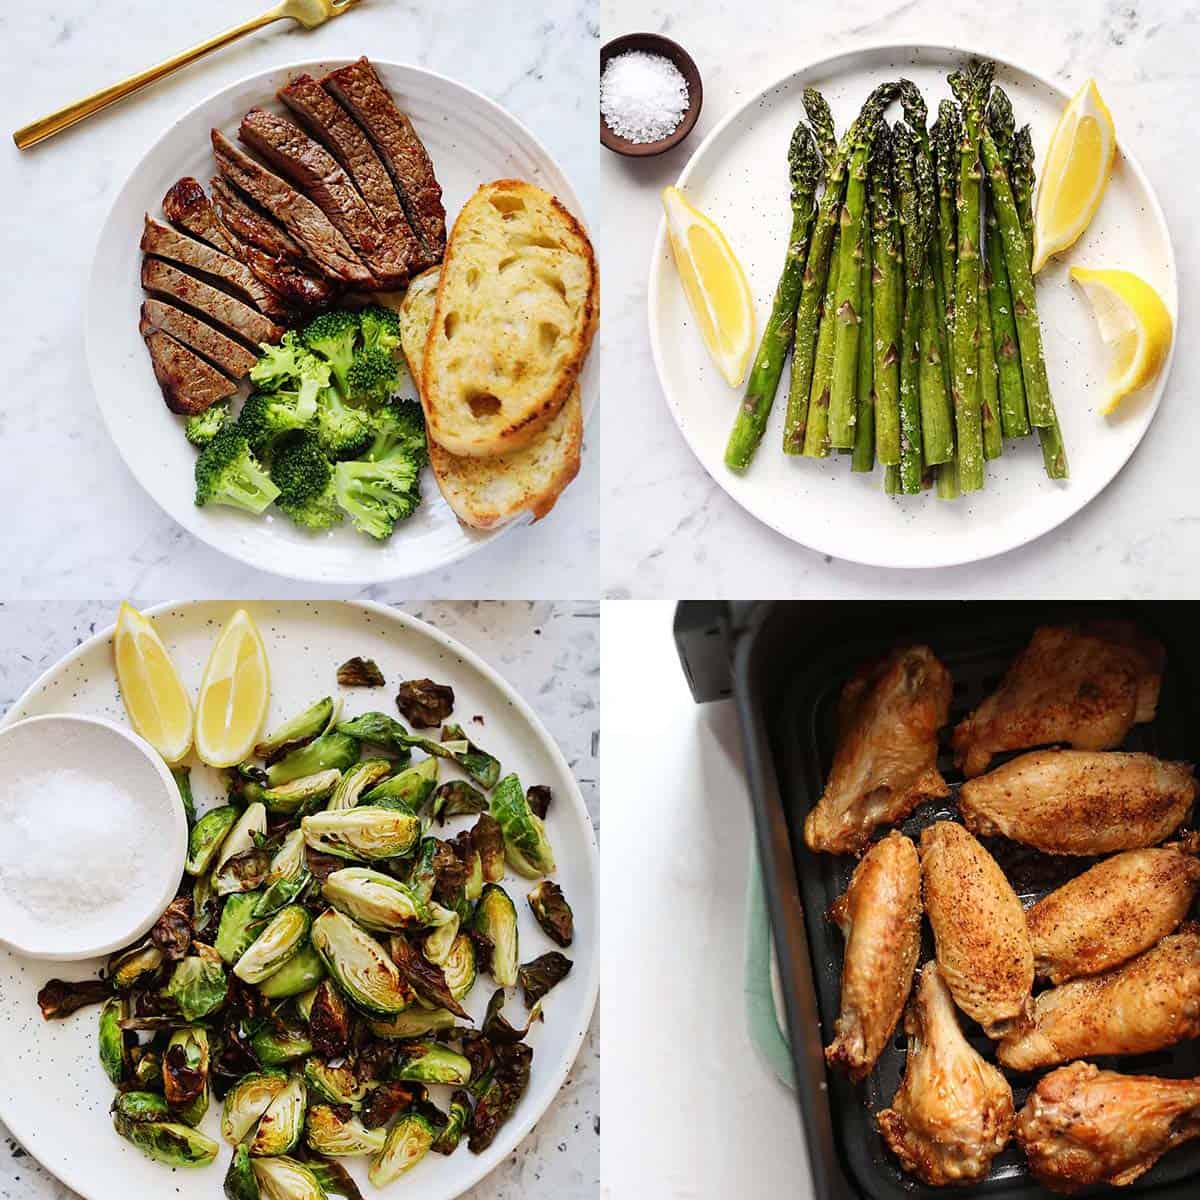 Air fryer recipes and tips